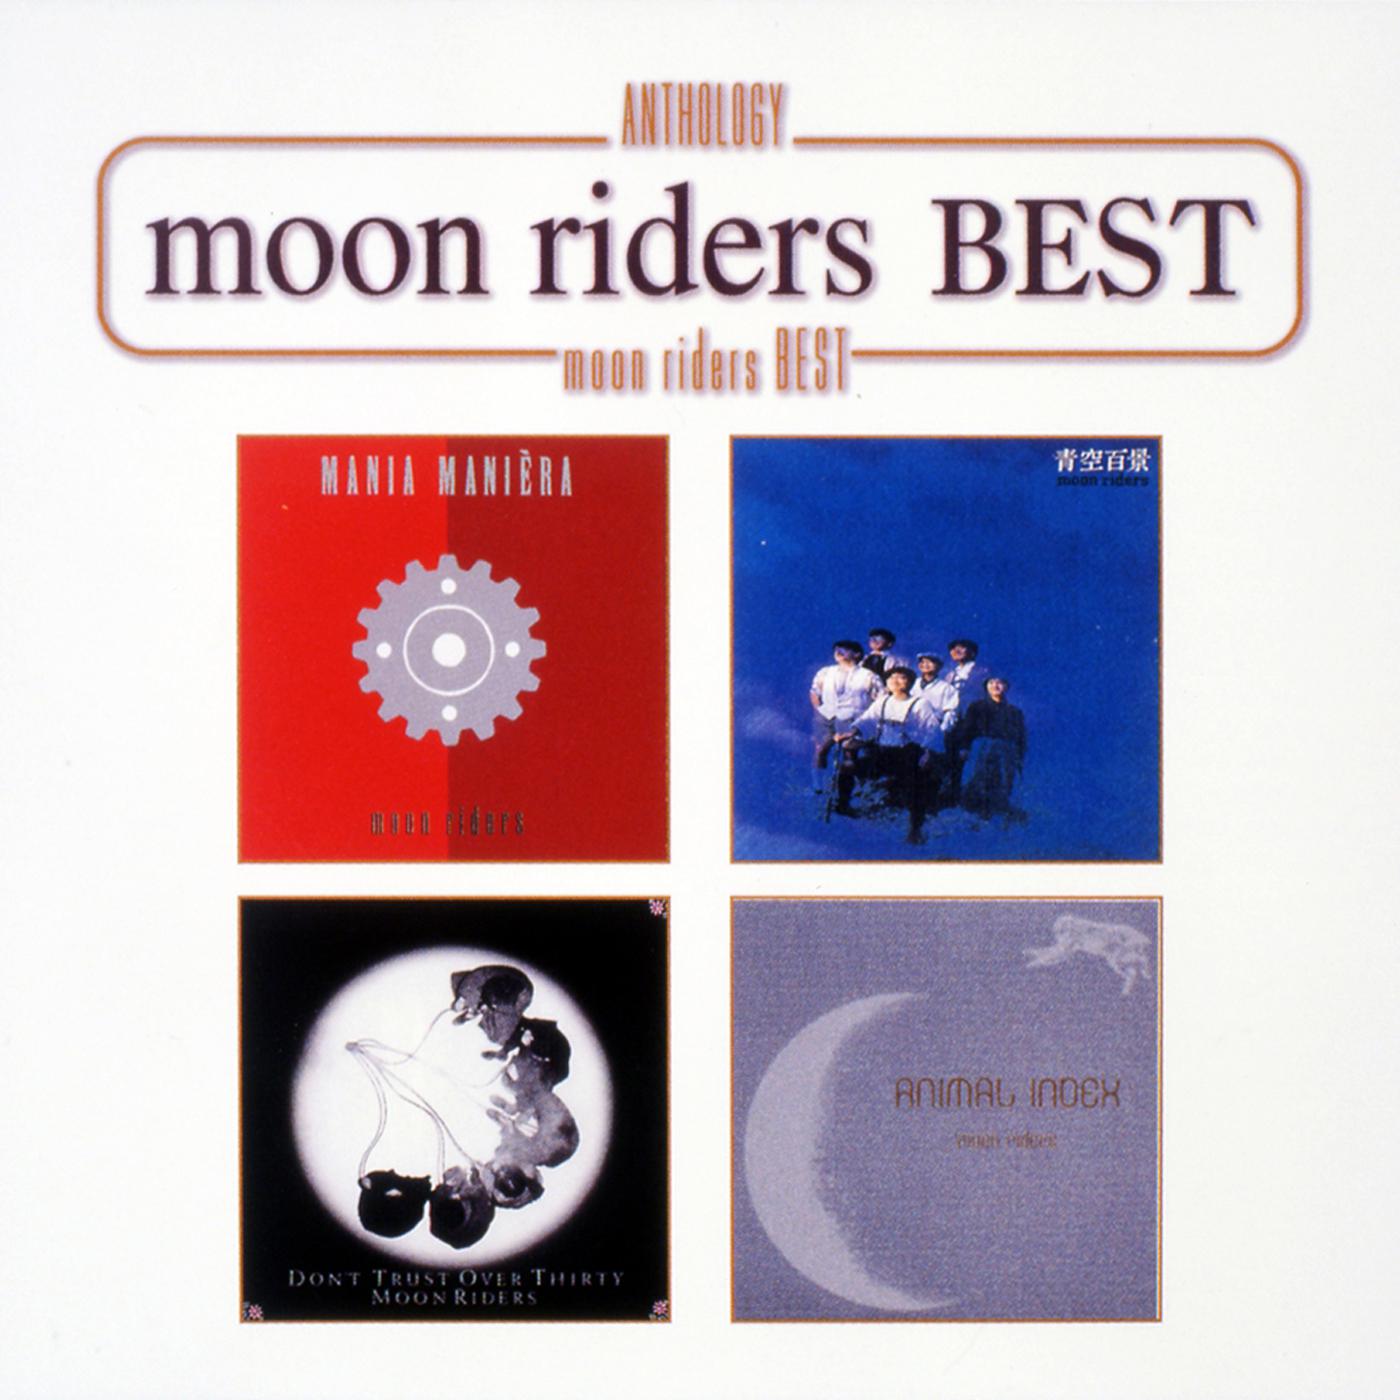 Anthology moon riders BEST